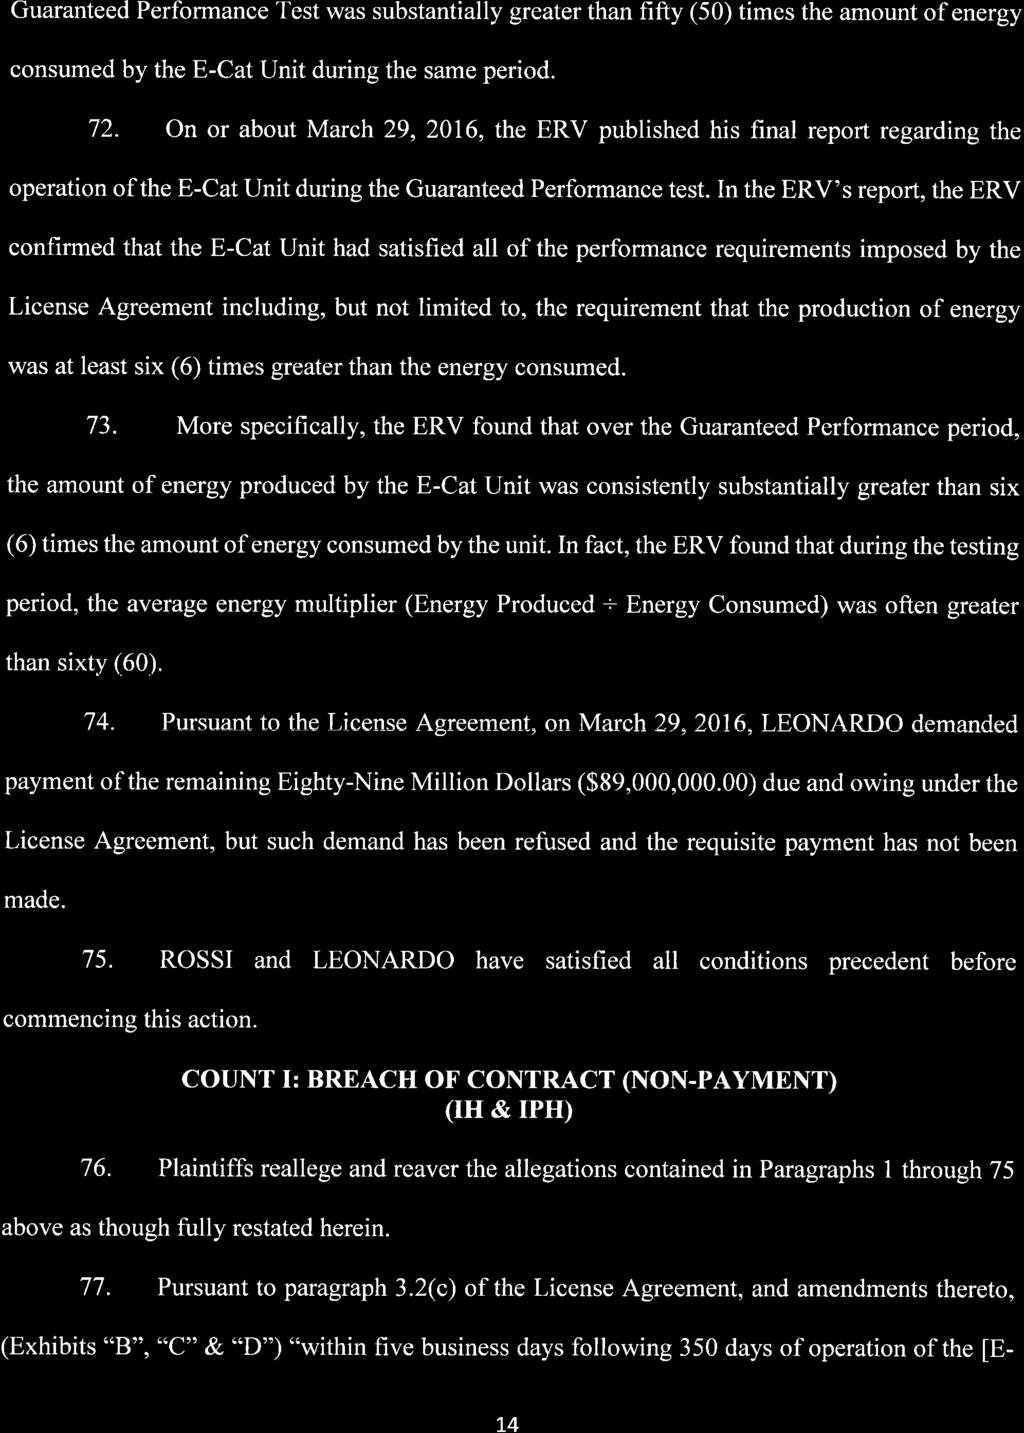 Case 1:16-cv-21199-CMA Document 1 Entered on FLSD Docket 04/05/2016 Page 14 of 27 Guaranteed Performance Test was substantially greater than f,rfty (50 times the amount of energy consumed by the